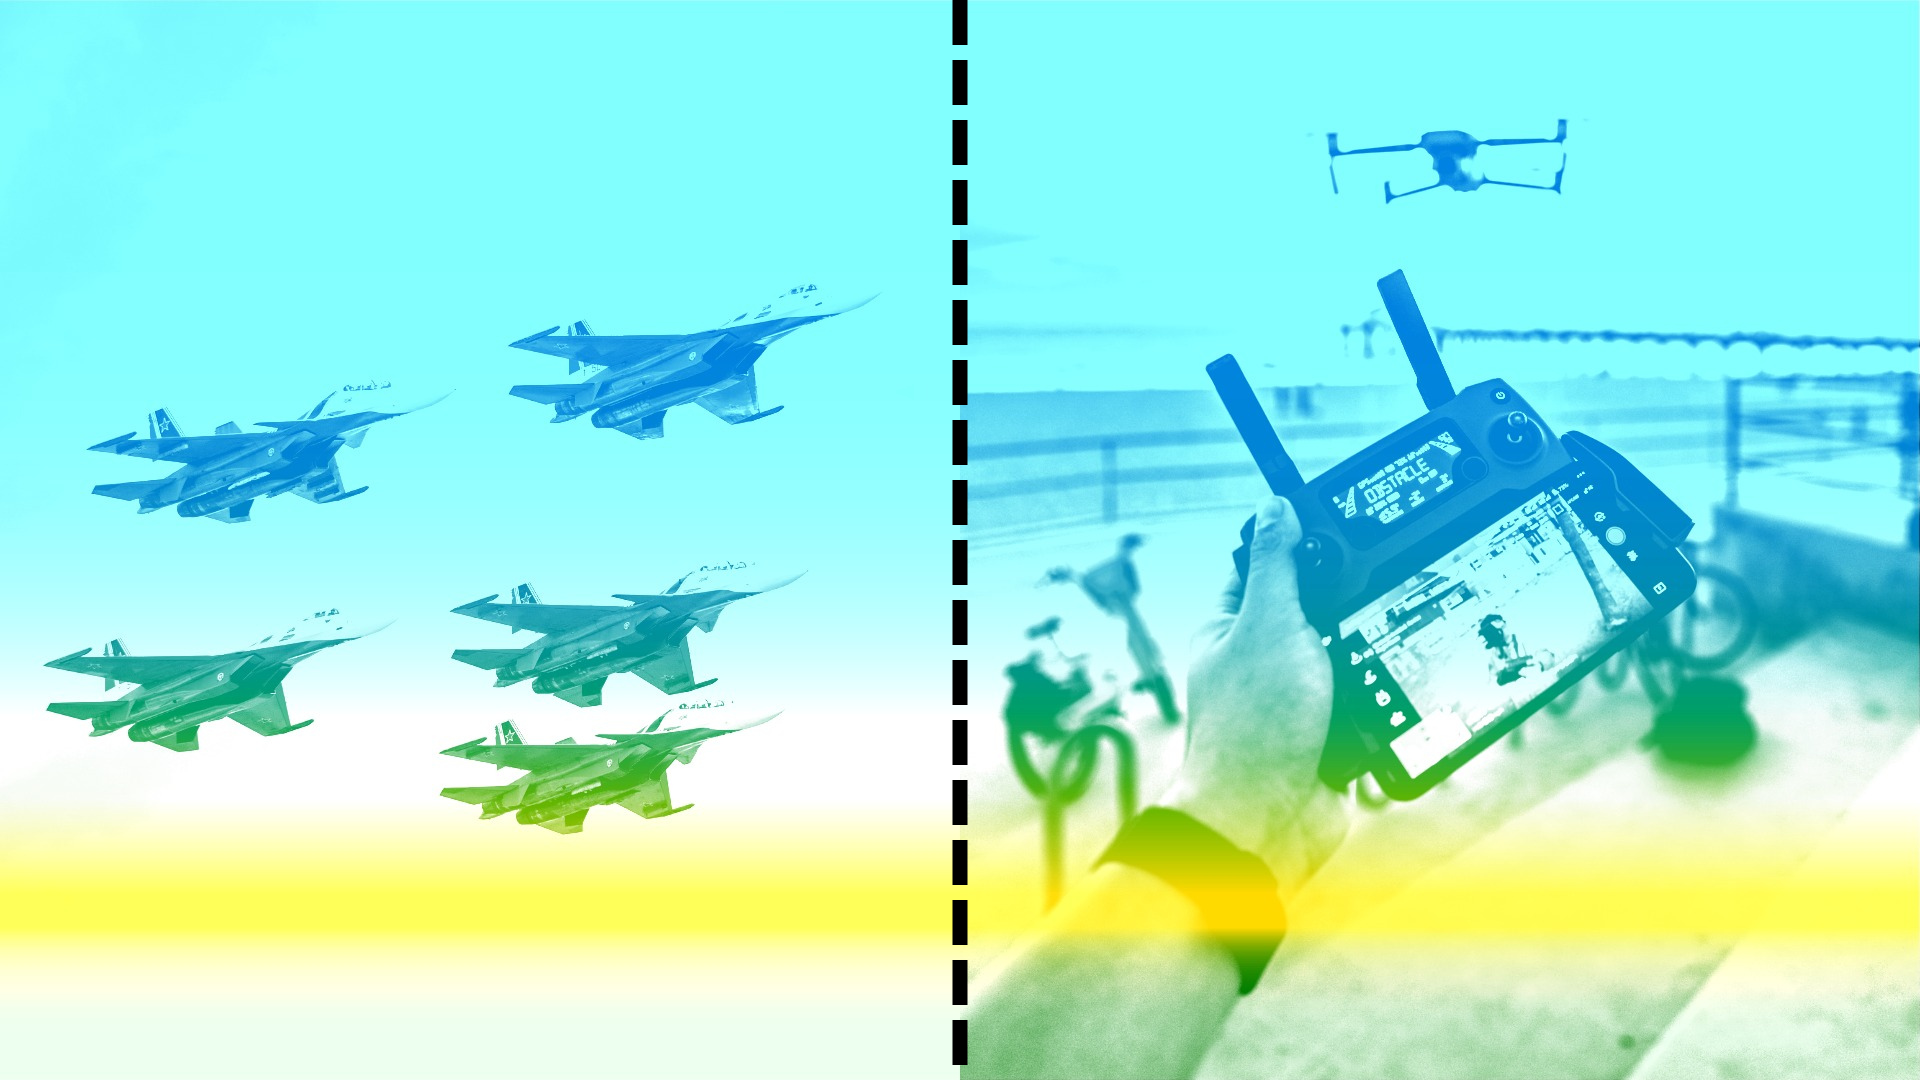 an image of a fleet of military airplanes on the left. On the right an image of a person's hands controlling a drone seen in the distance. The images are separated by a perforated line.